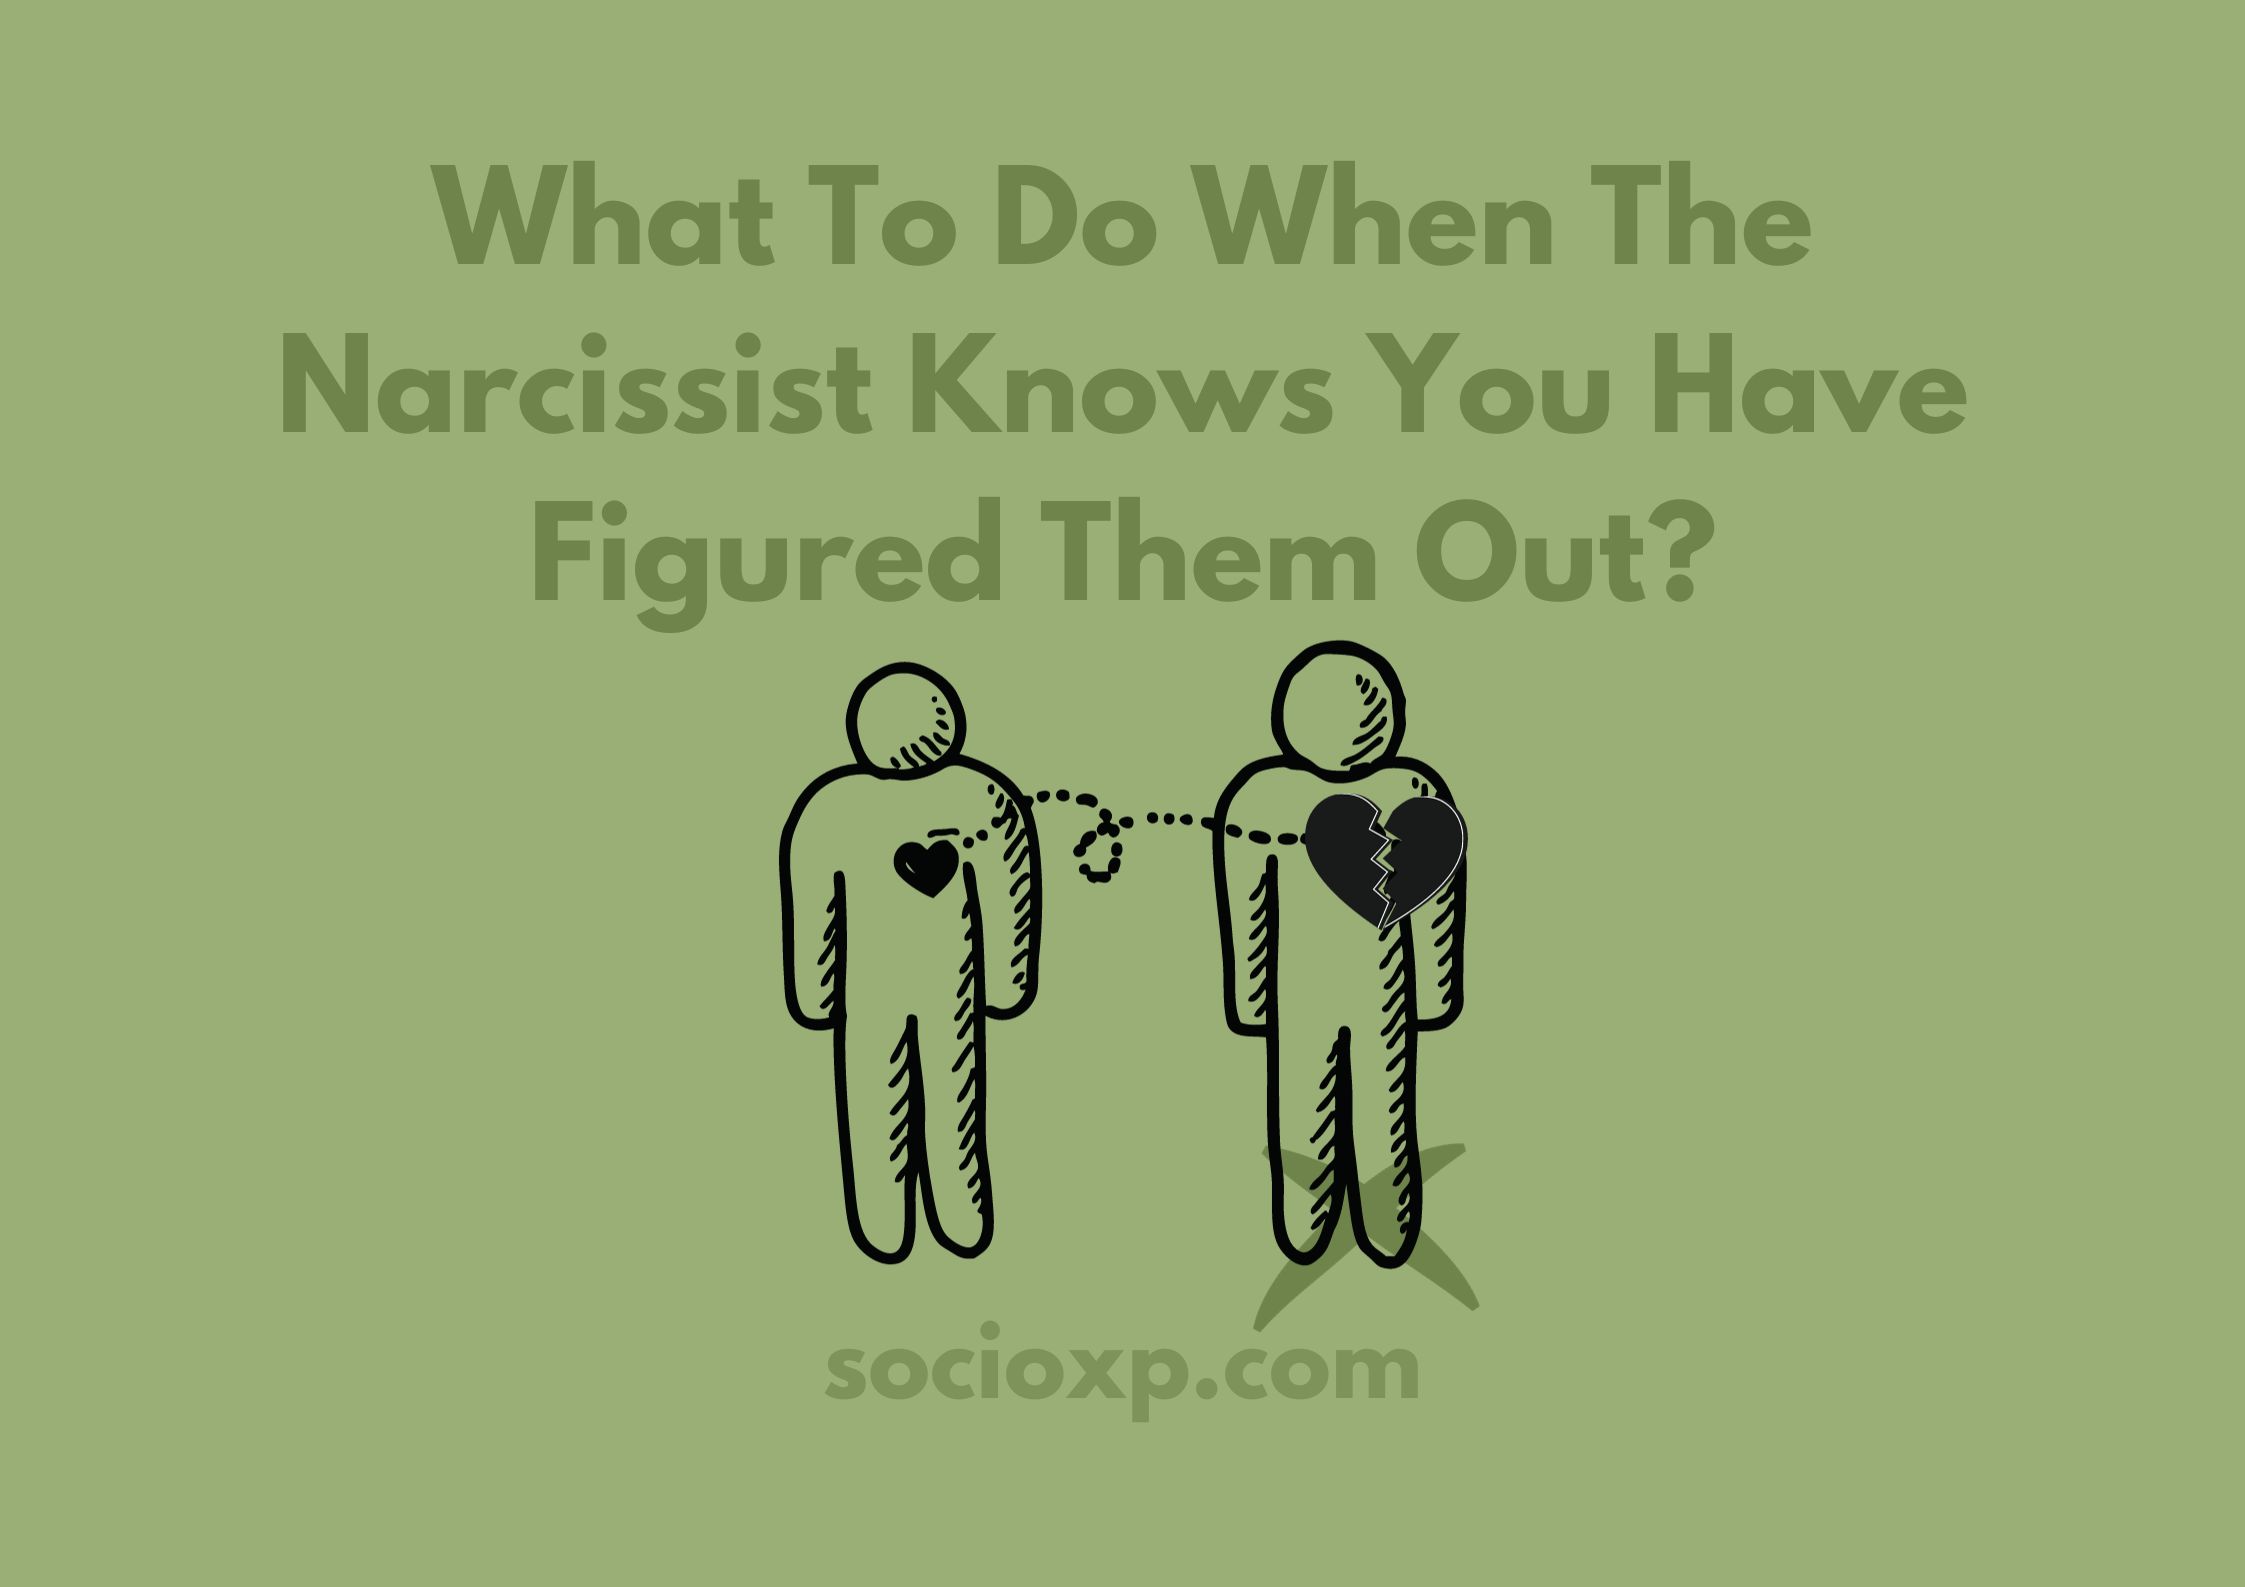 What To Do When The Narcissist Knows You Have Figured Them Out?